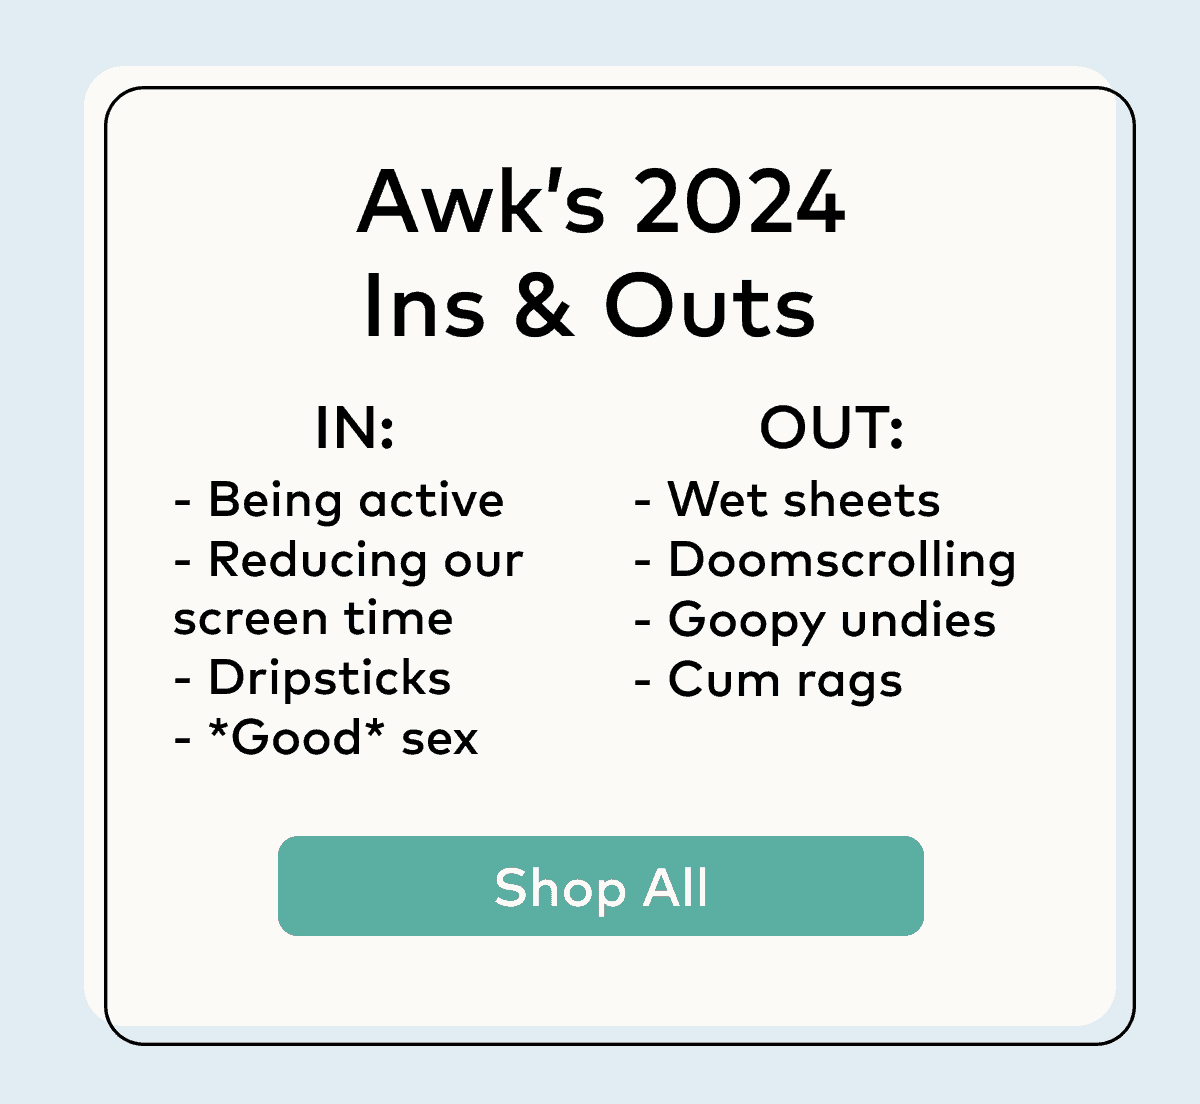 Our 2024 ins and outs. Shop all